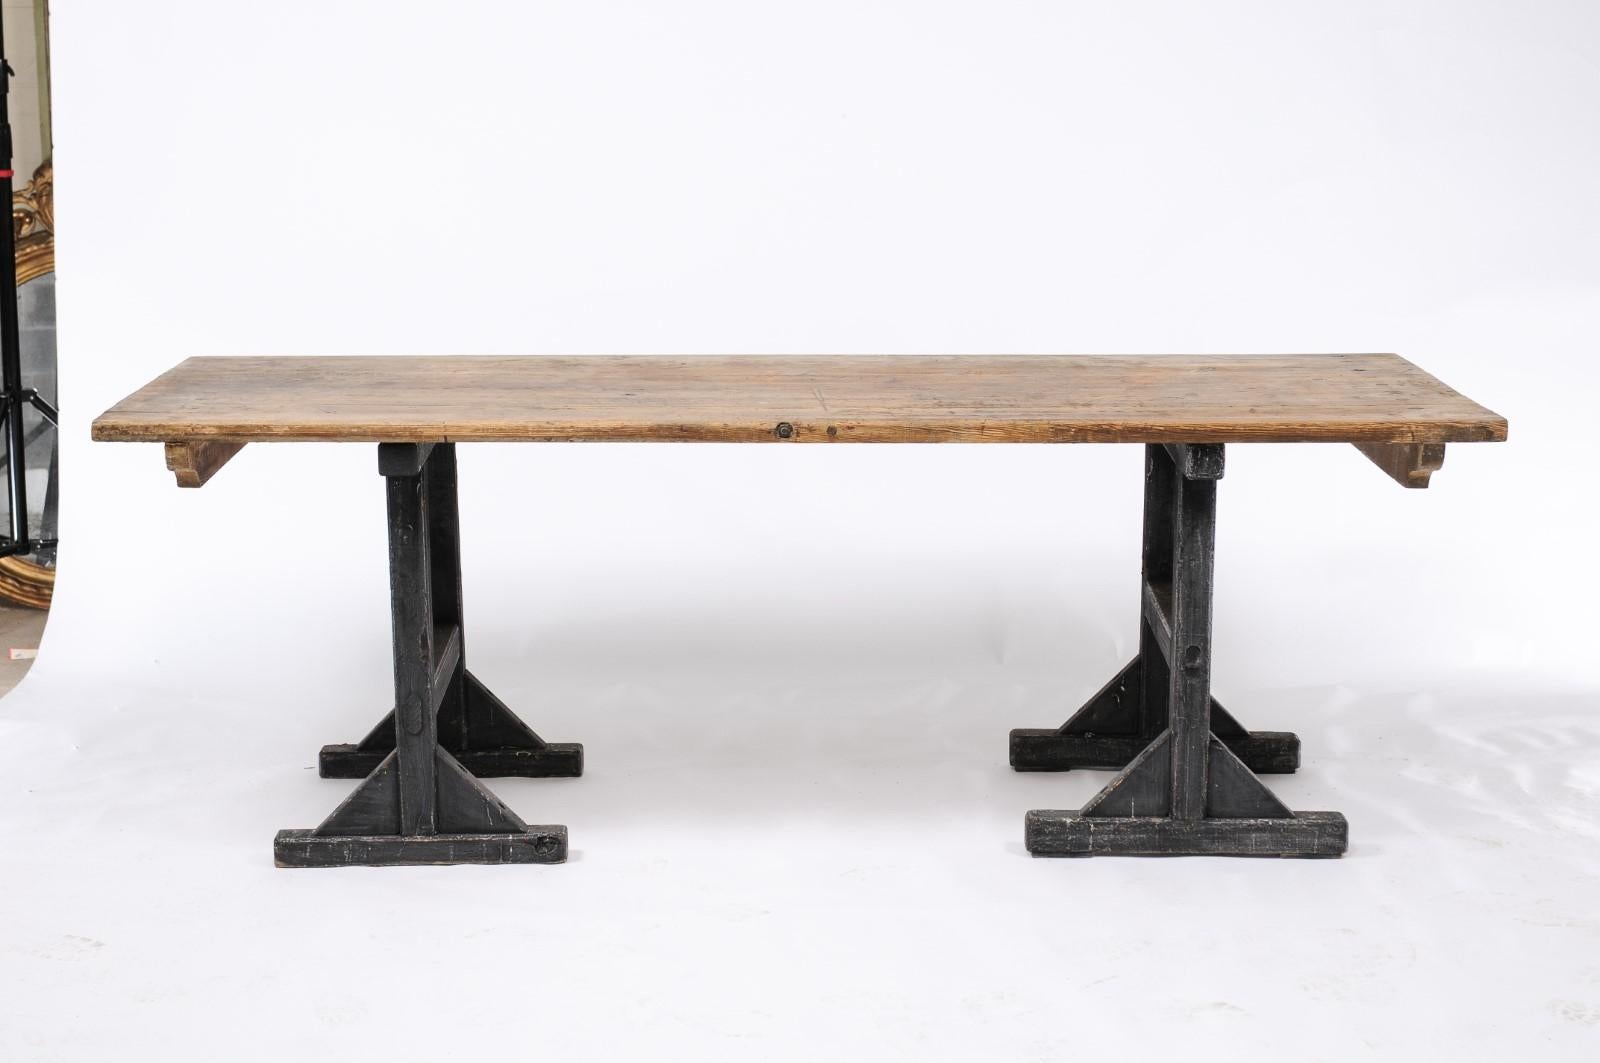 A French long pine work table from the early 20th century, with black-painted trestle base and rustic rectangular top. A sturdy and nicely rustic work table from Northern France. Made of pine, the plateau has an aged patina and loads of character.